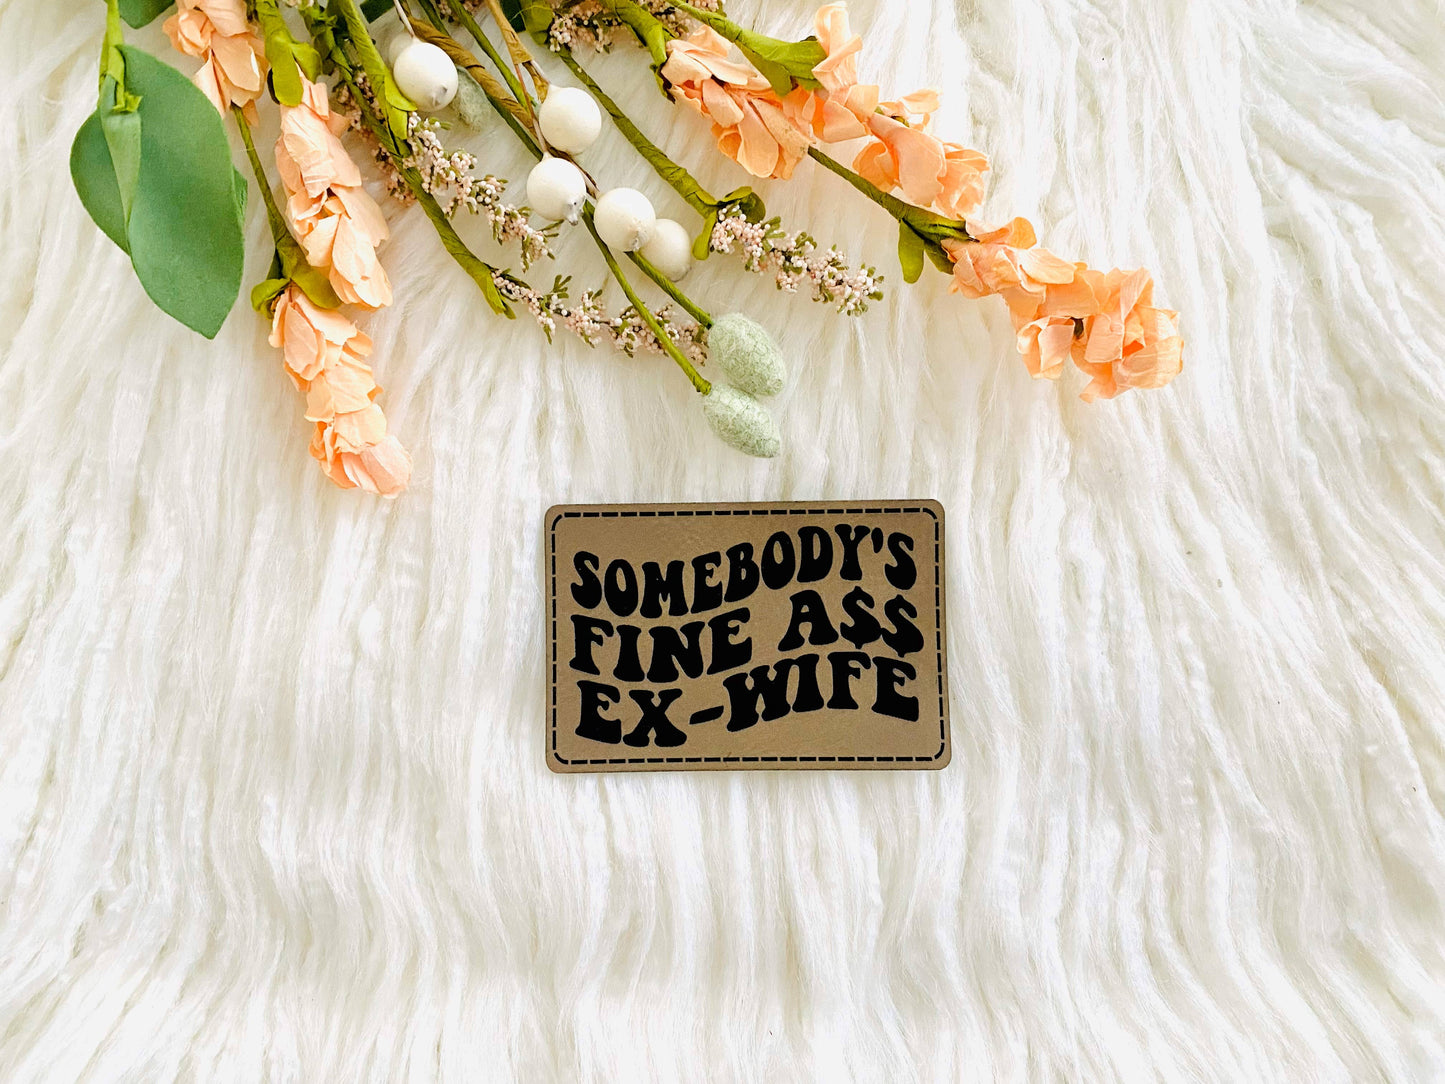 T & A Designs LLC - Somebody's fine ass ex-wife leather patch